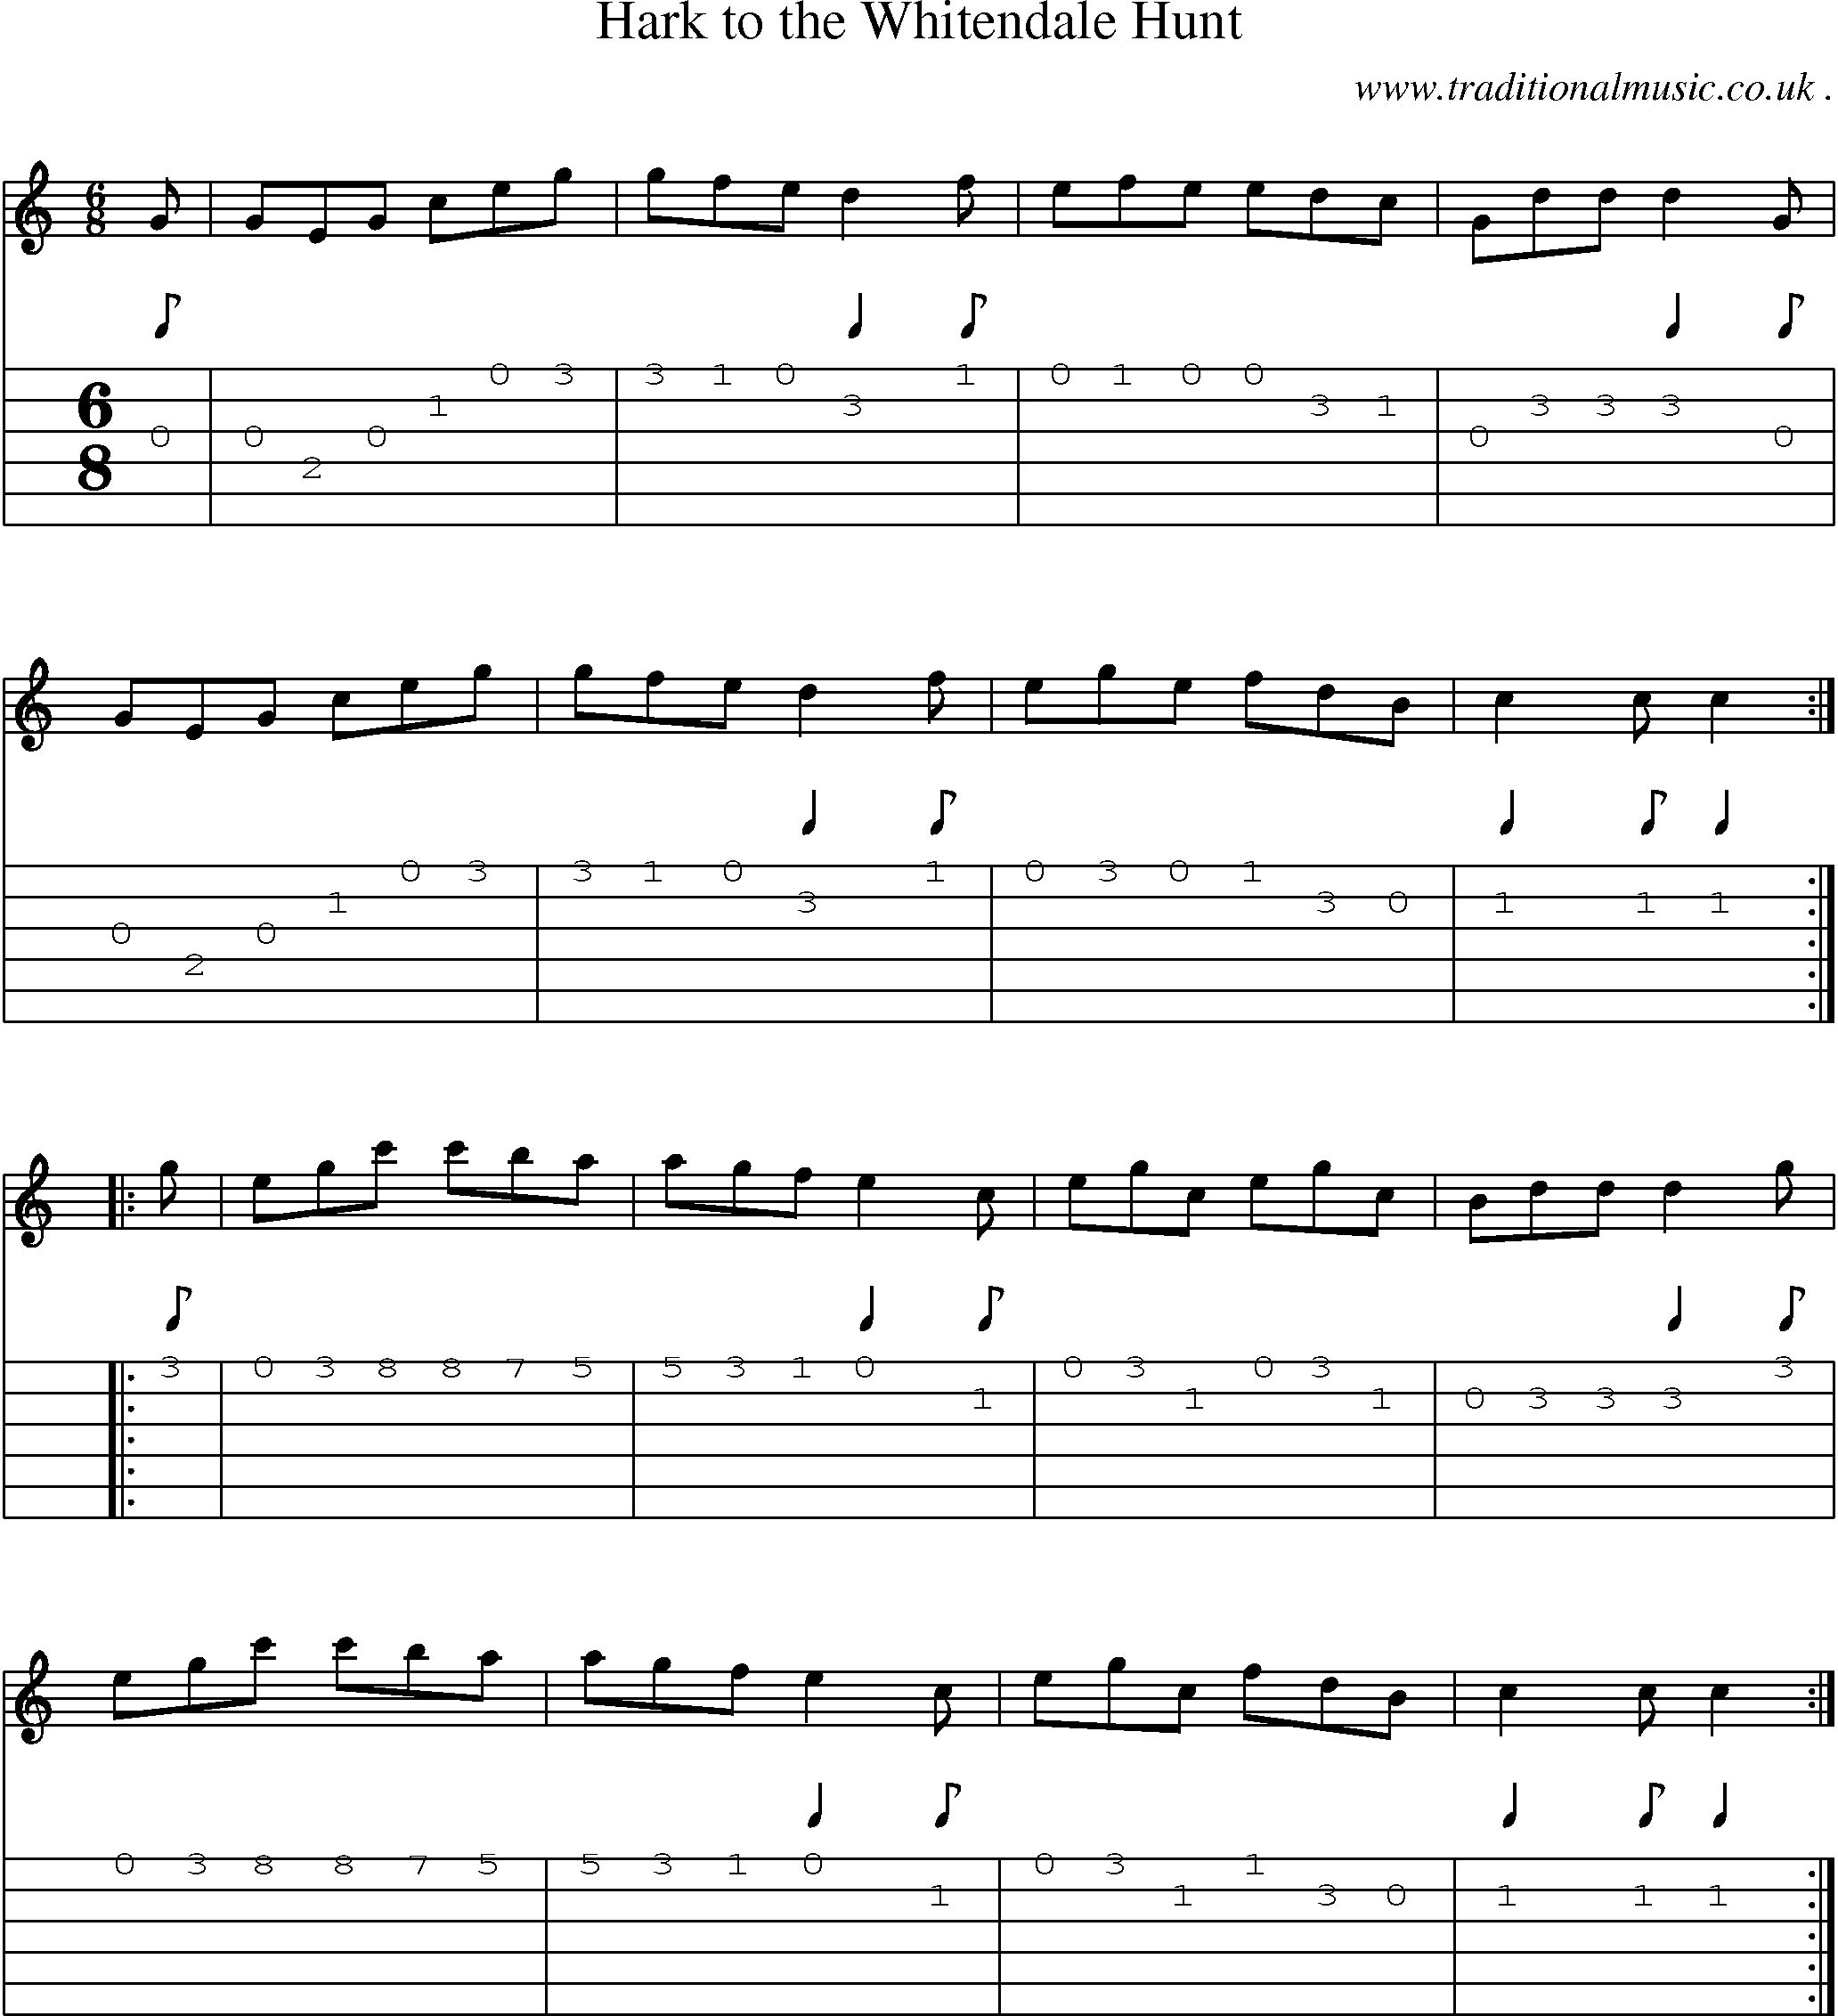 Sheet-Music and Guitar Tabs for Hark To The Whitendale Hunt